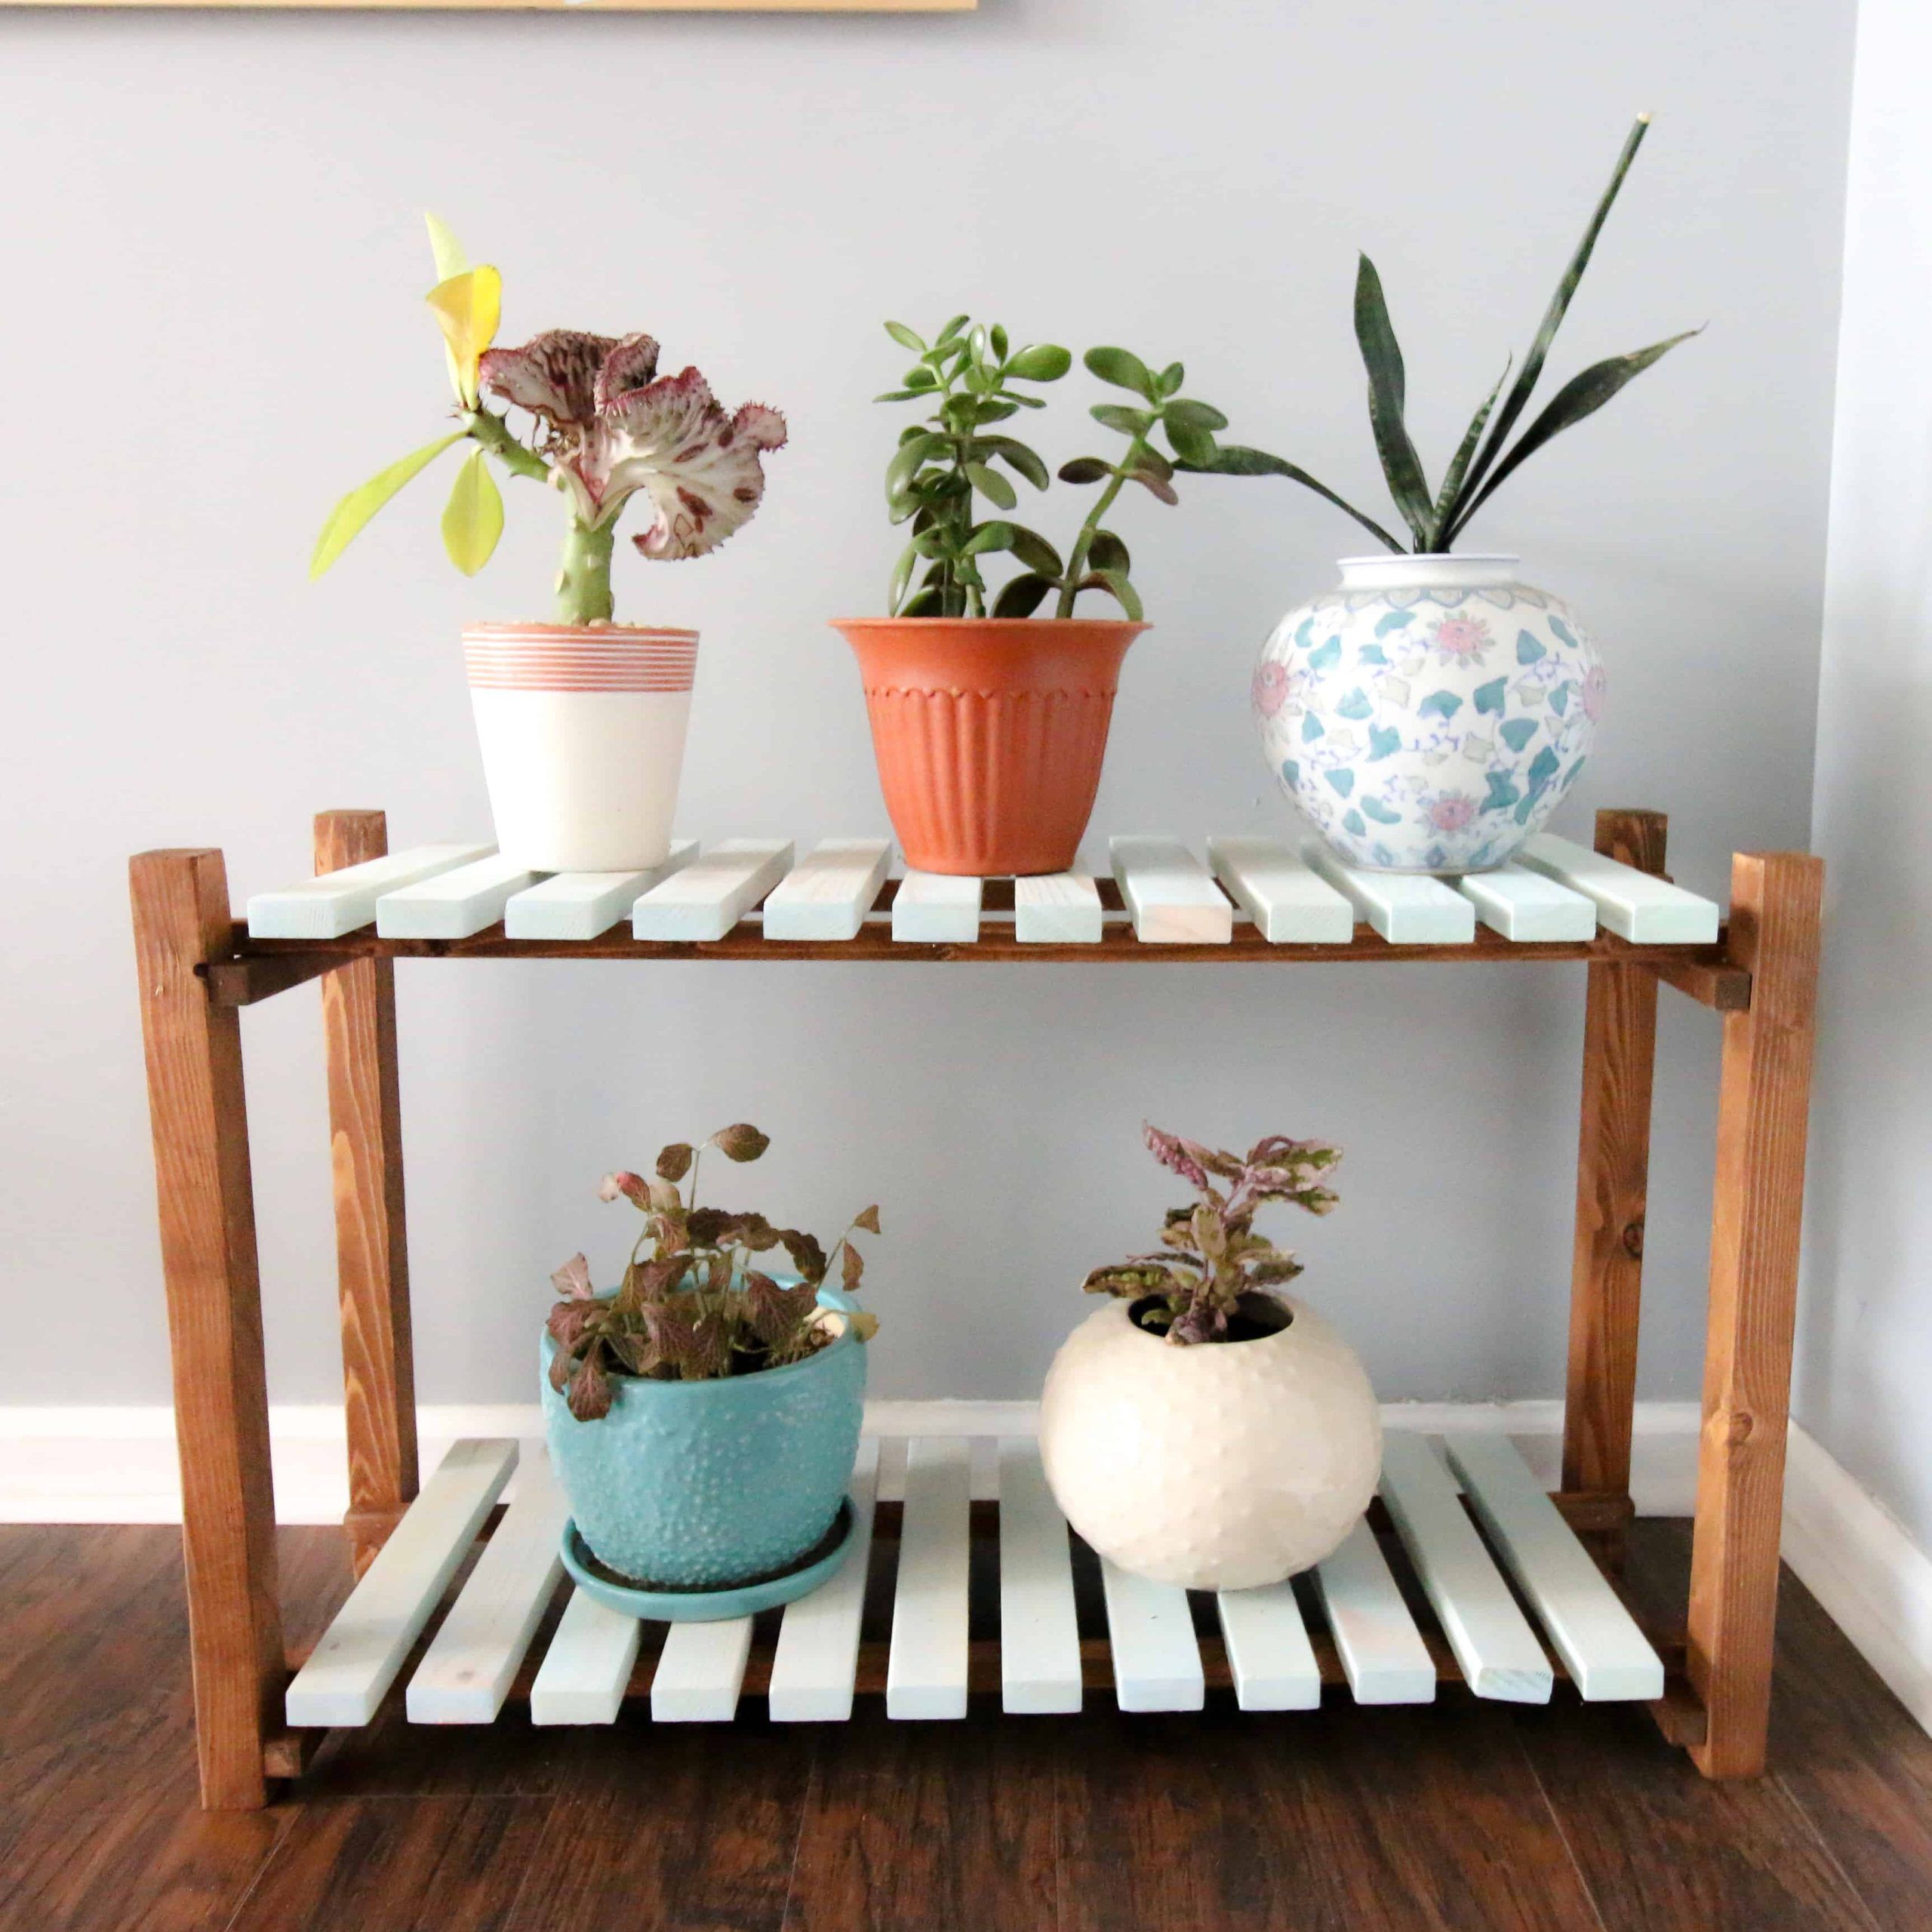 32 Diy Plant Stands Ideas You Can Make With Regard To Wood Plant Stands (View 10 of 15)